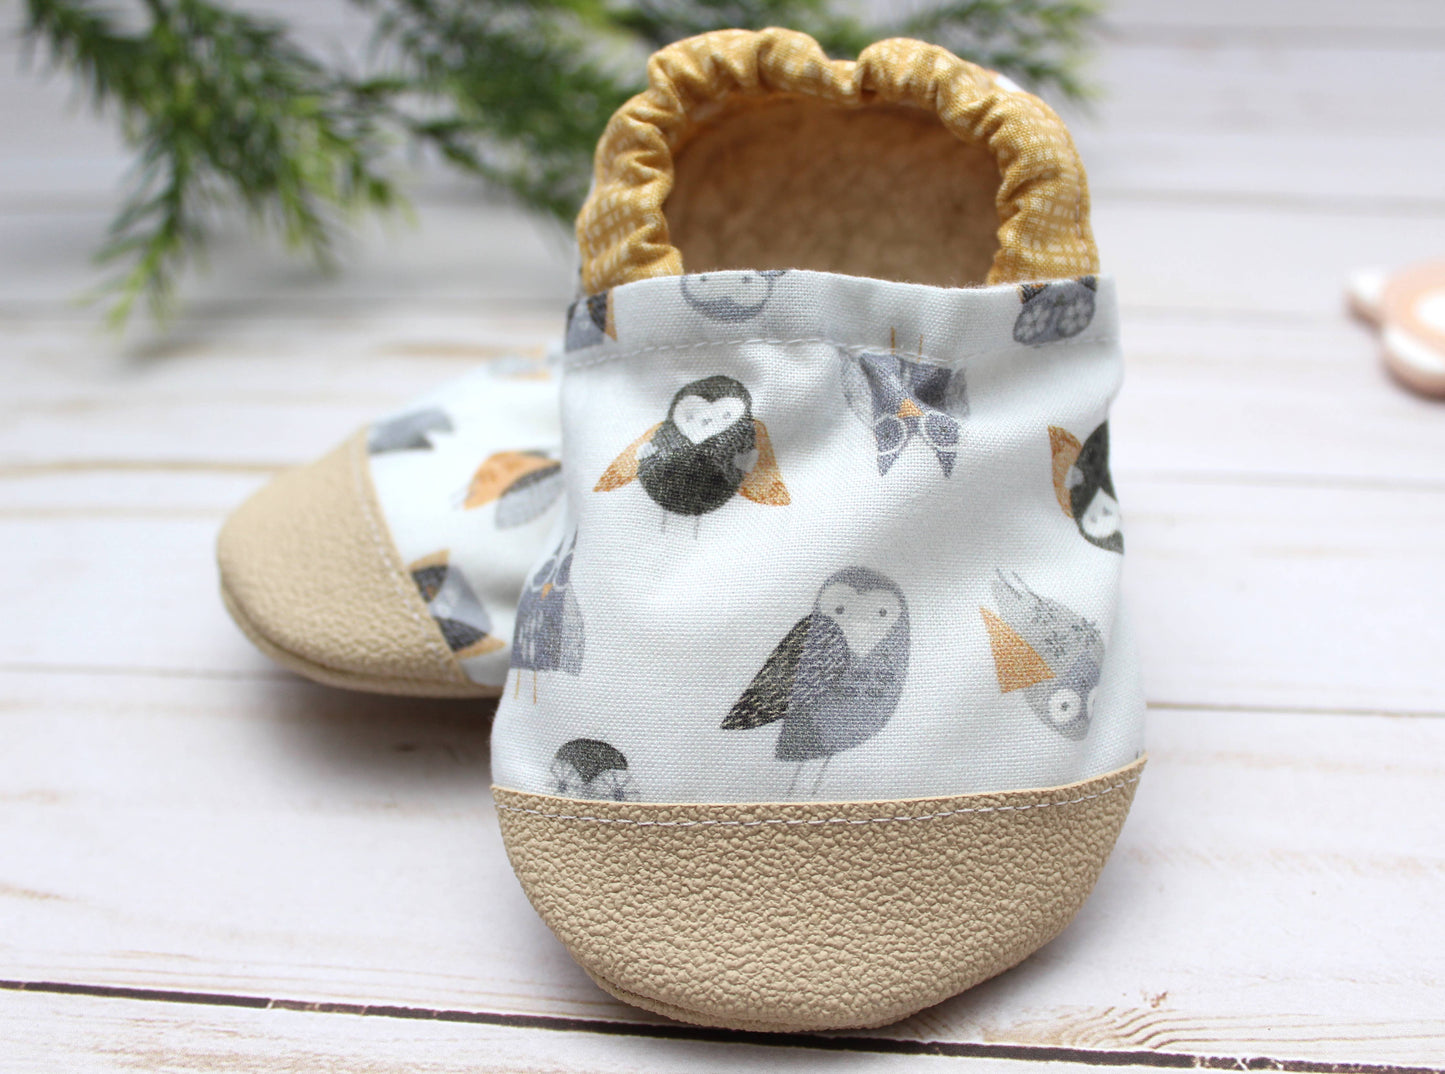 Scooter Booties - Hoot Hoot Owl Baby Shoes: 2 Toddler